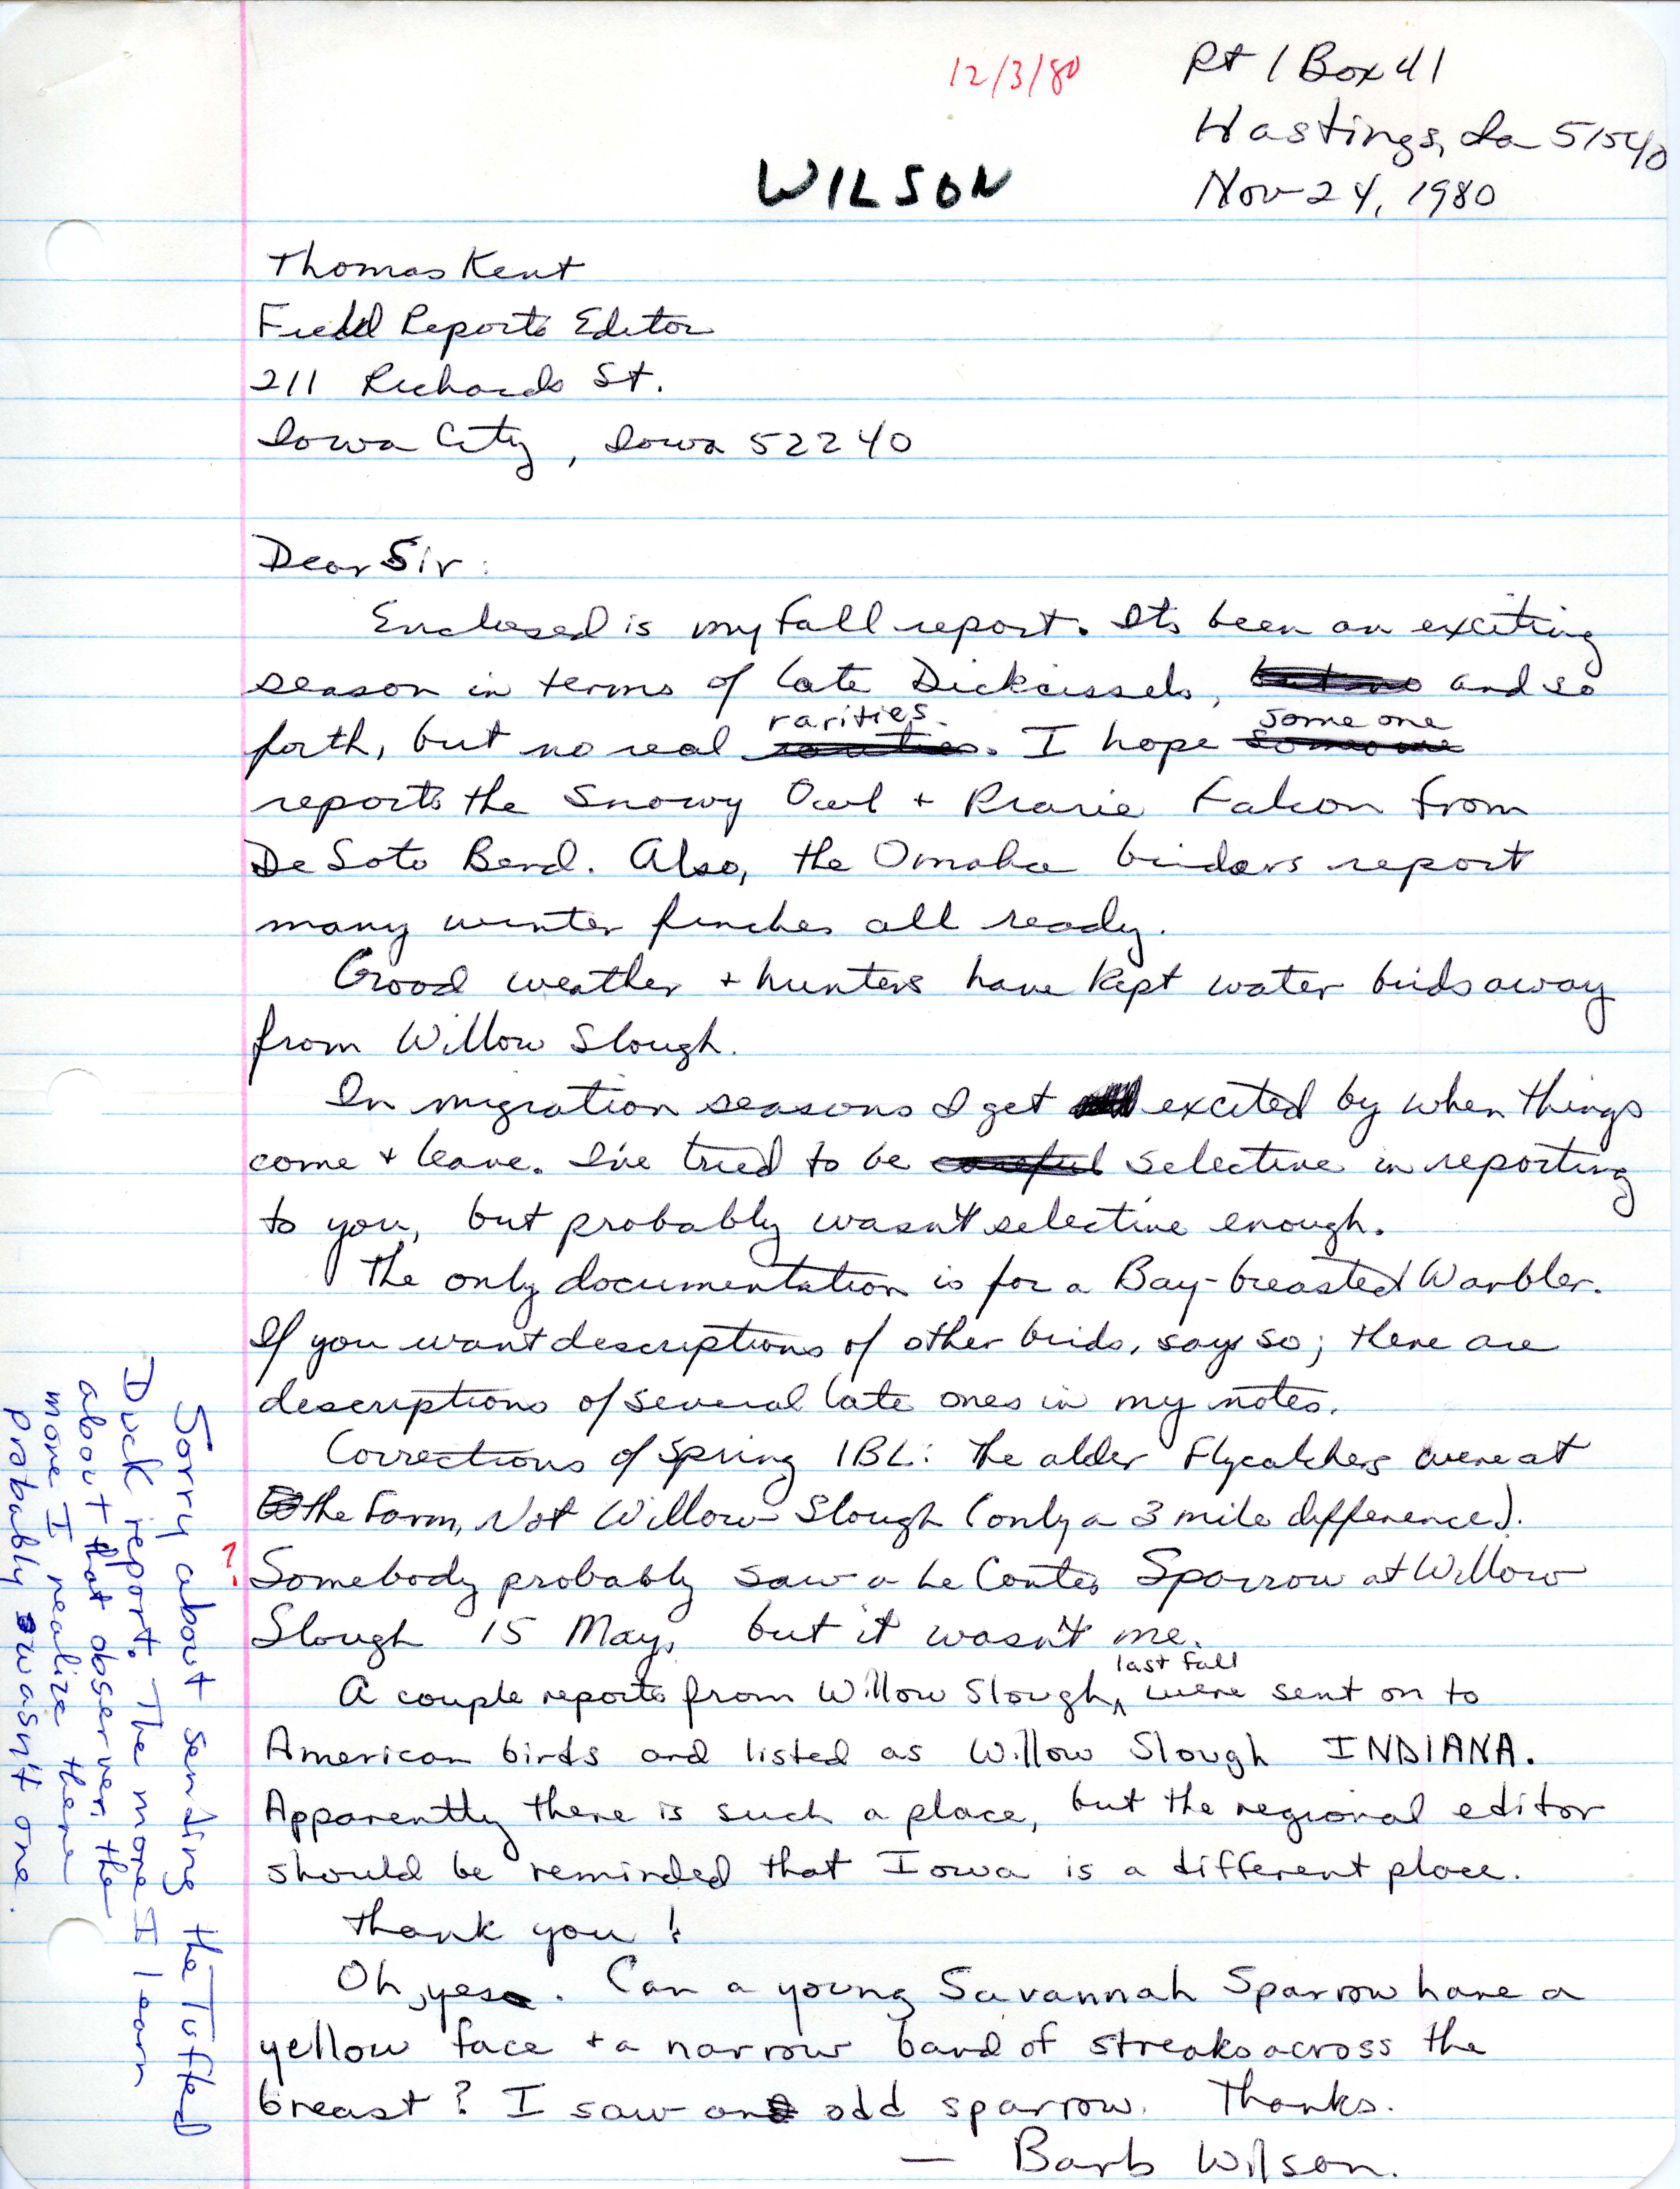 Barb Wilson letter to Thomas Kent regarding birds sighted in Fall, November 24, 1980